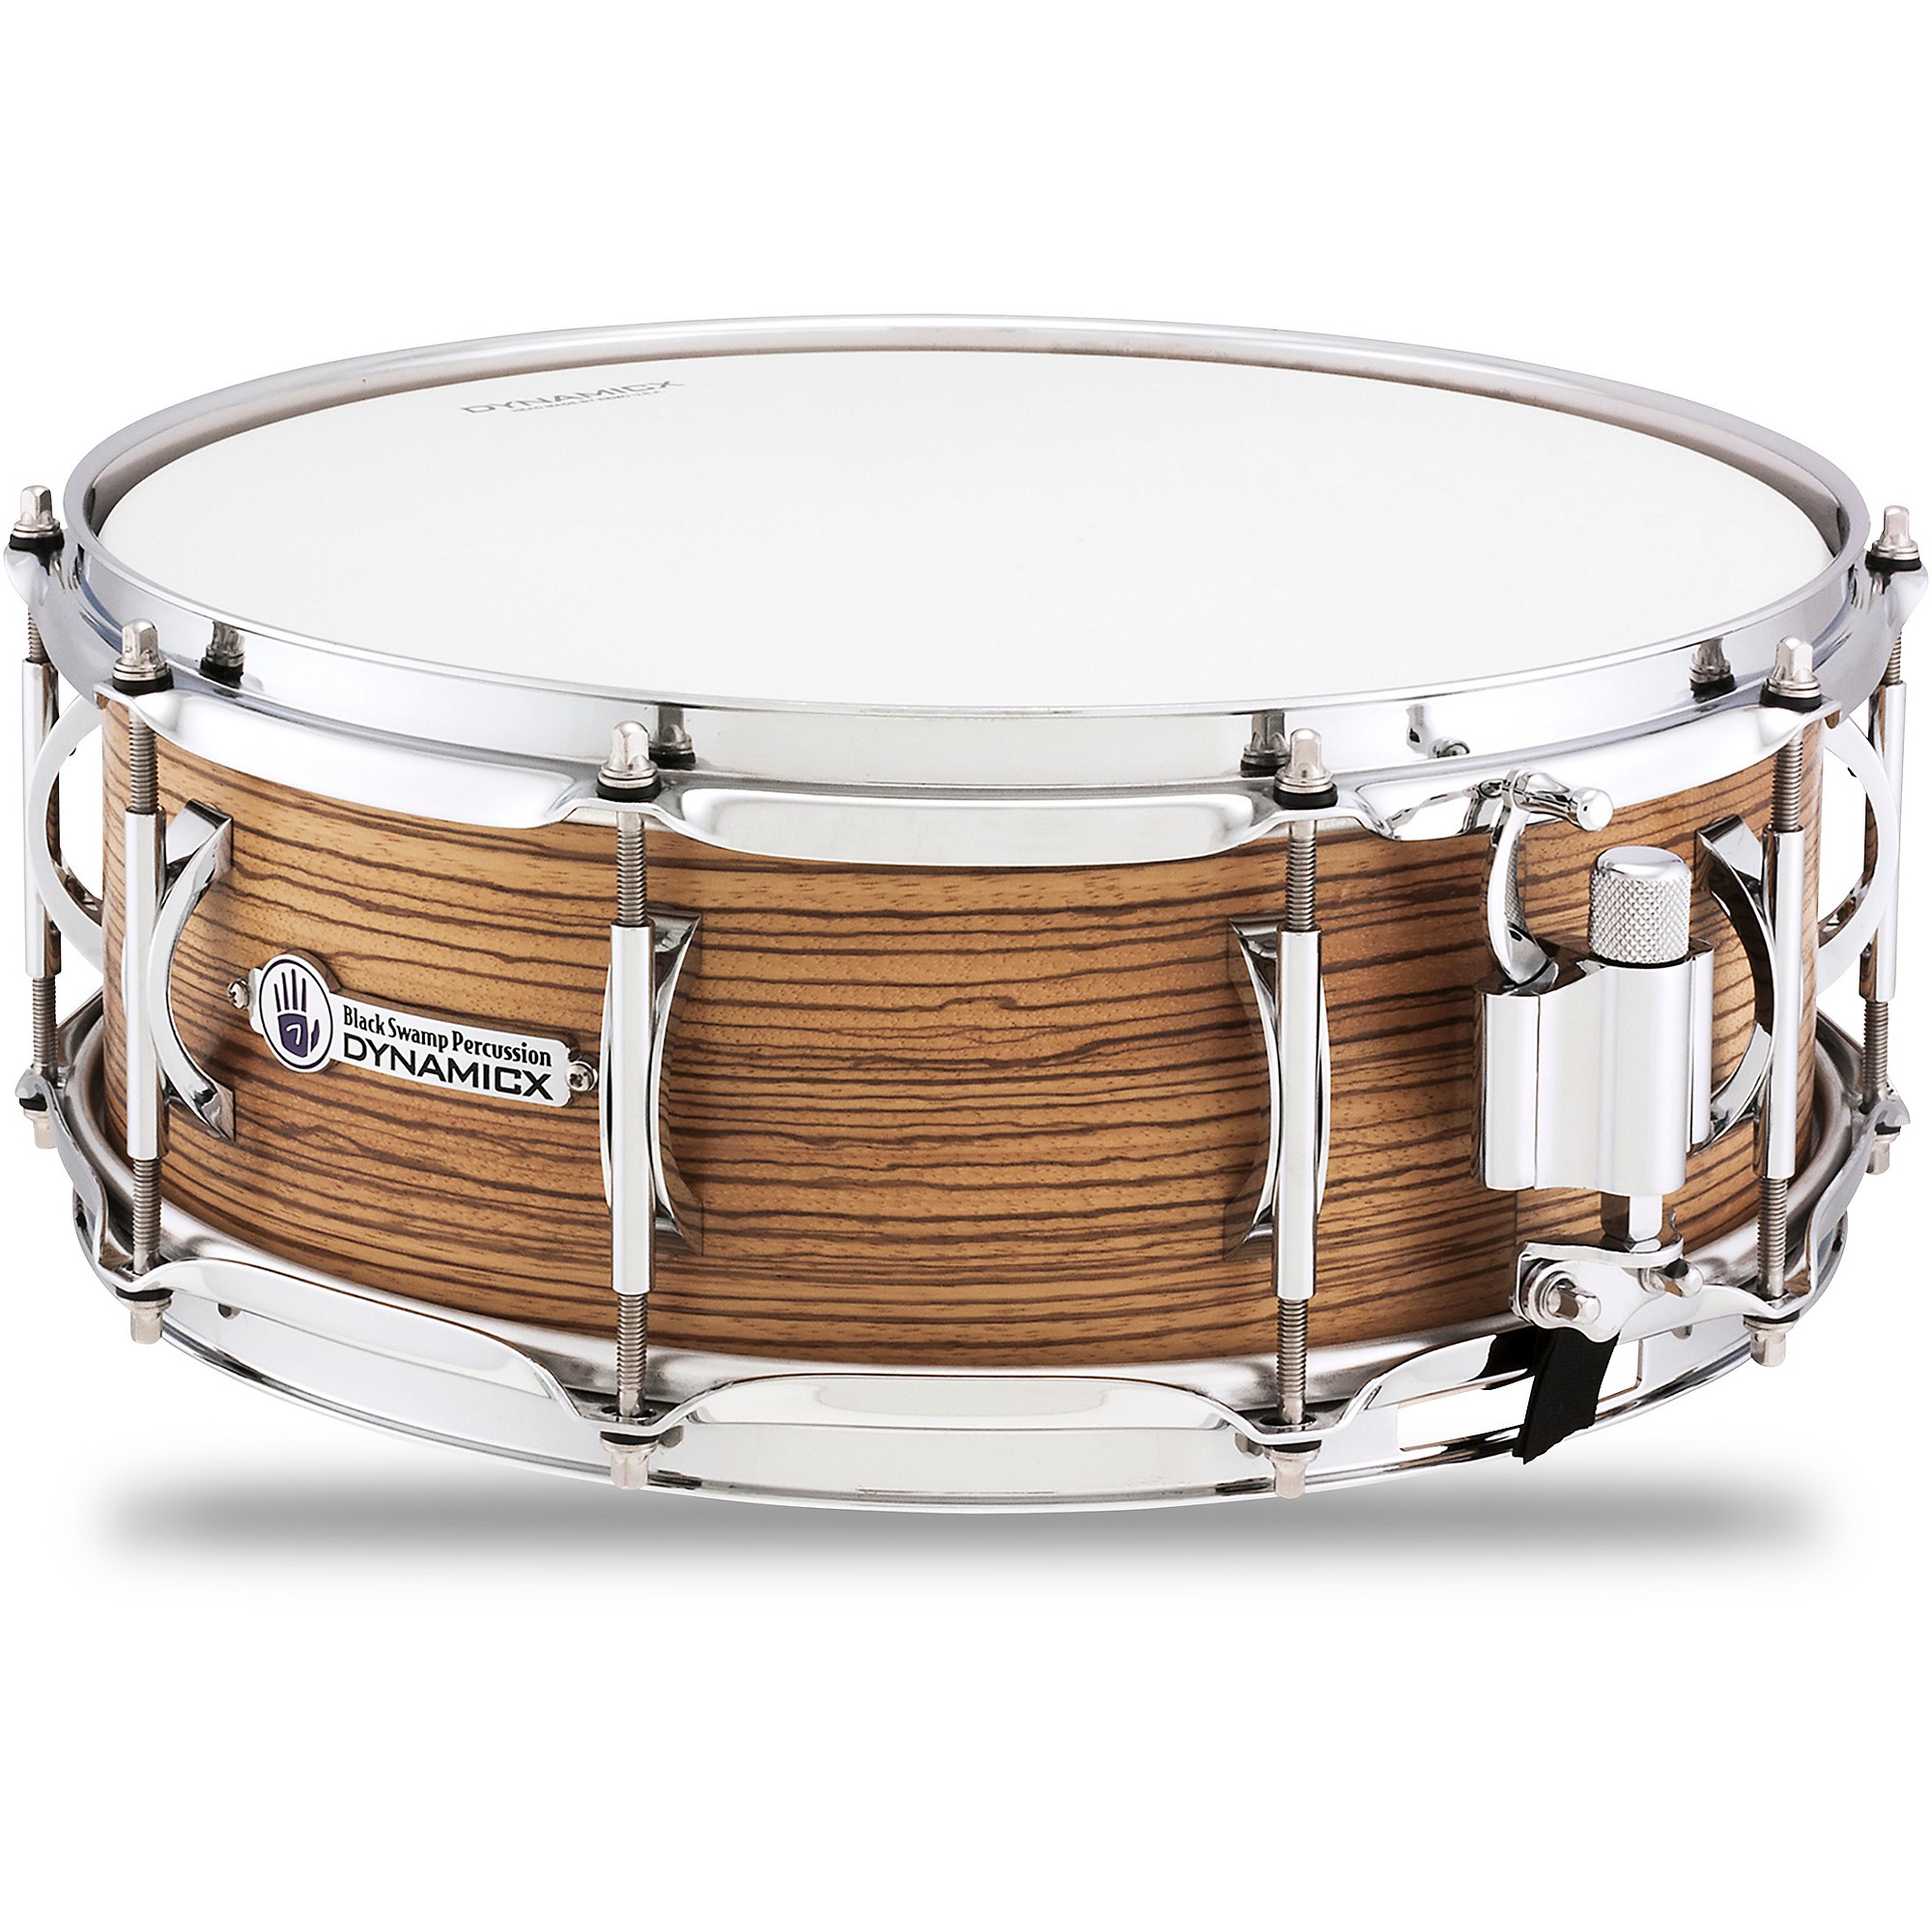 Black Swamp Percussion Dynamicx BackBeat Series Snare Drum with